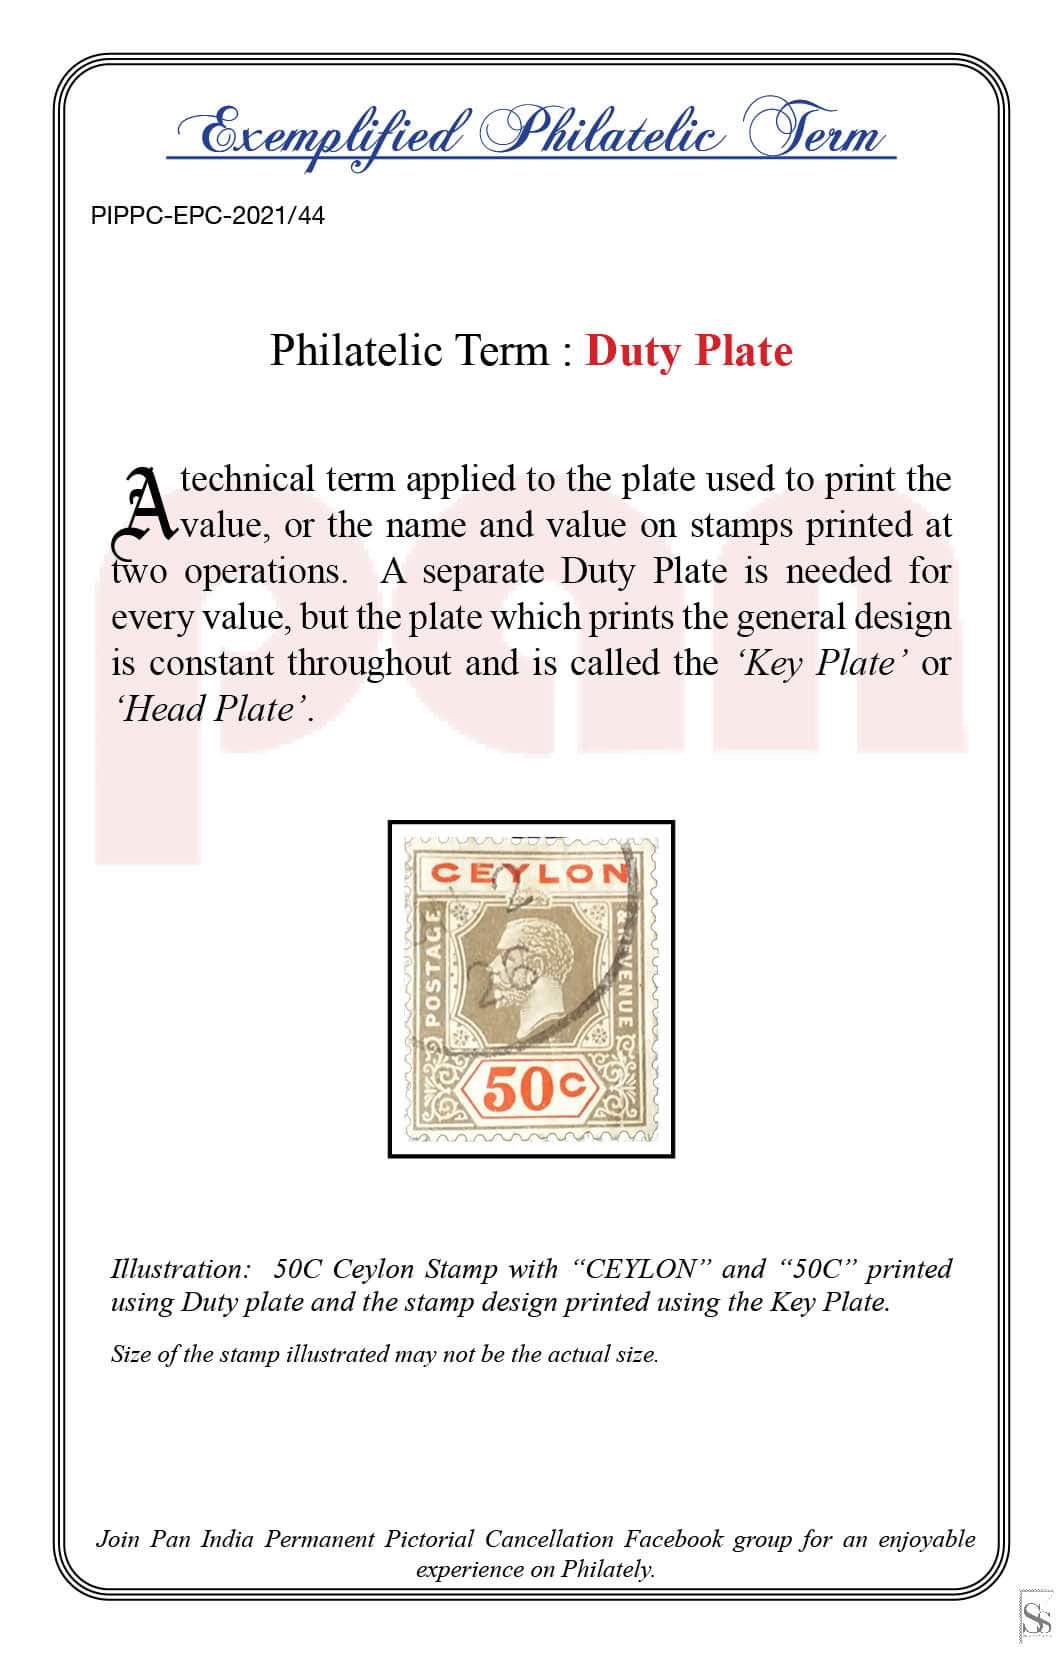 44. Today's Exemplified Philatelic term-Duty Plate